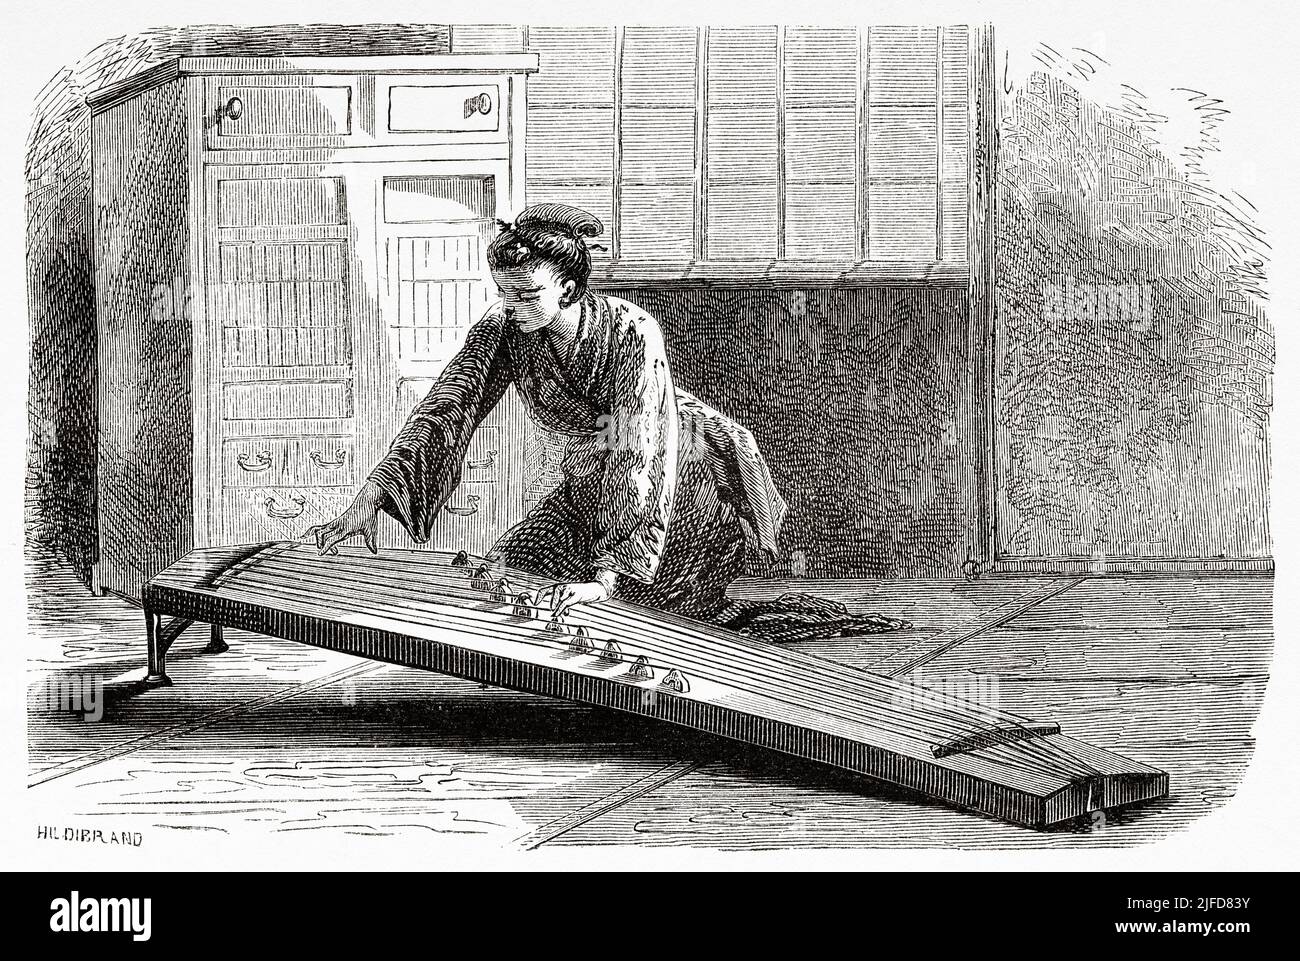 Japanese musician gril playing a koto, Japanese stringed musical instrument. Japan, Asia. Journey to Japan by Aime Humbert 1863-1864 from Le Tour du Monde 1867 Stock Photo